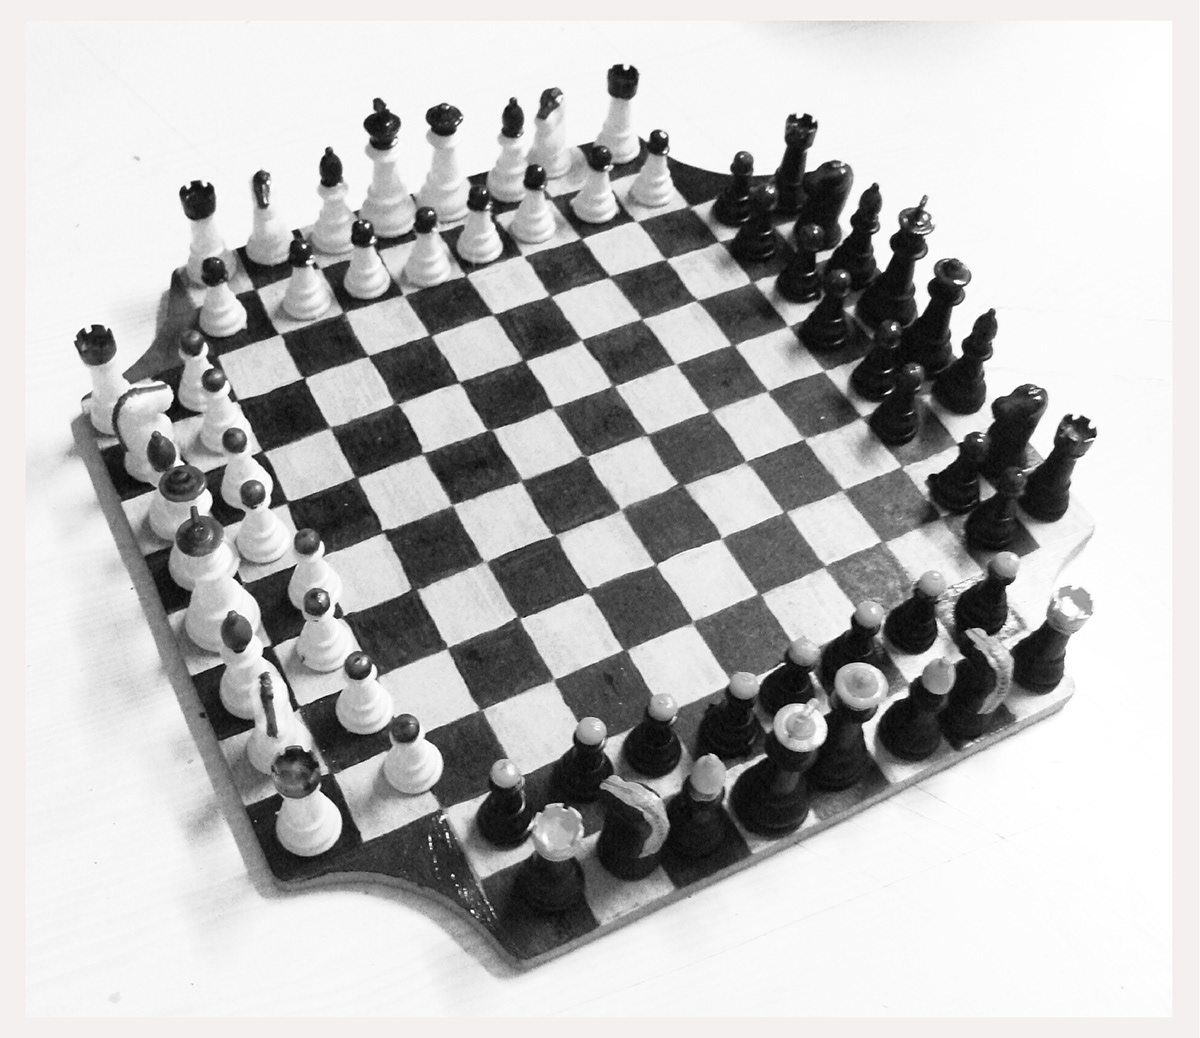 chess variant fun chess game for beginners board game